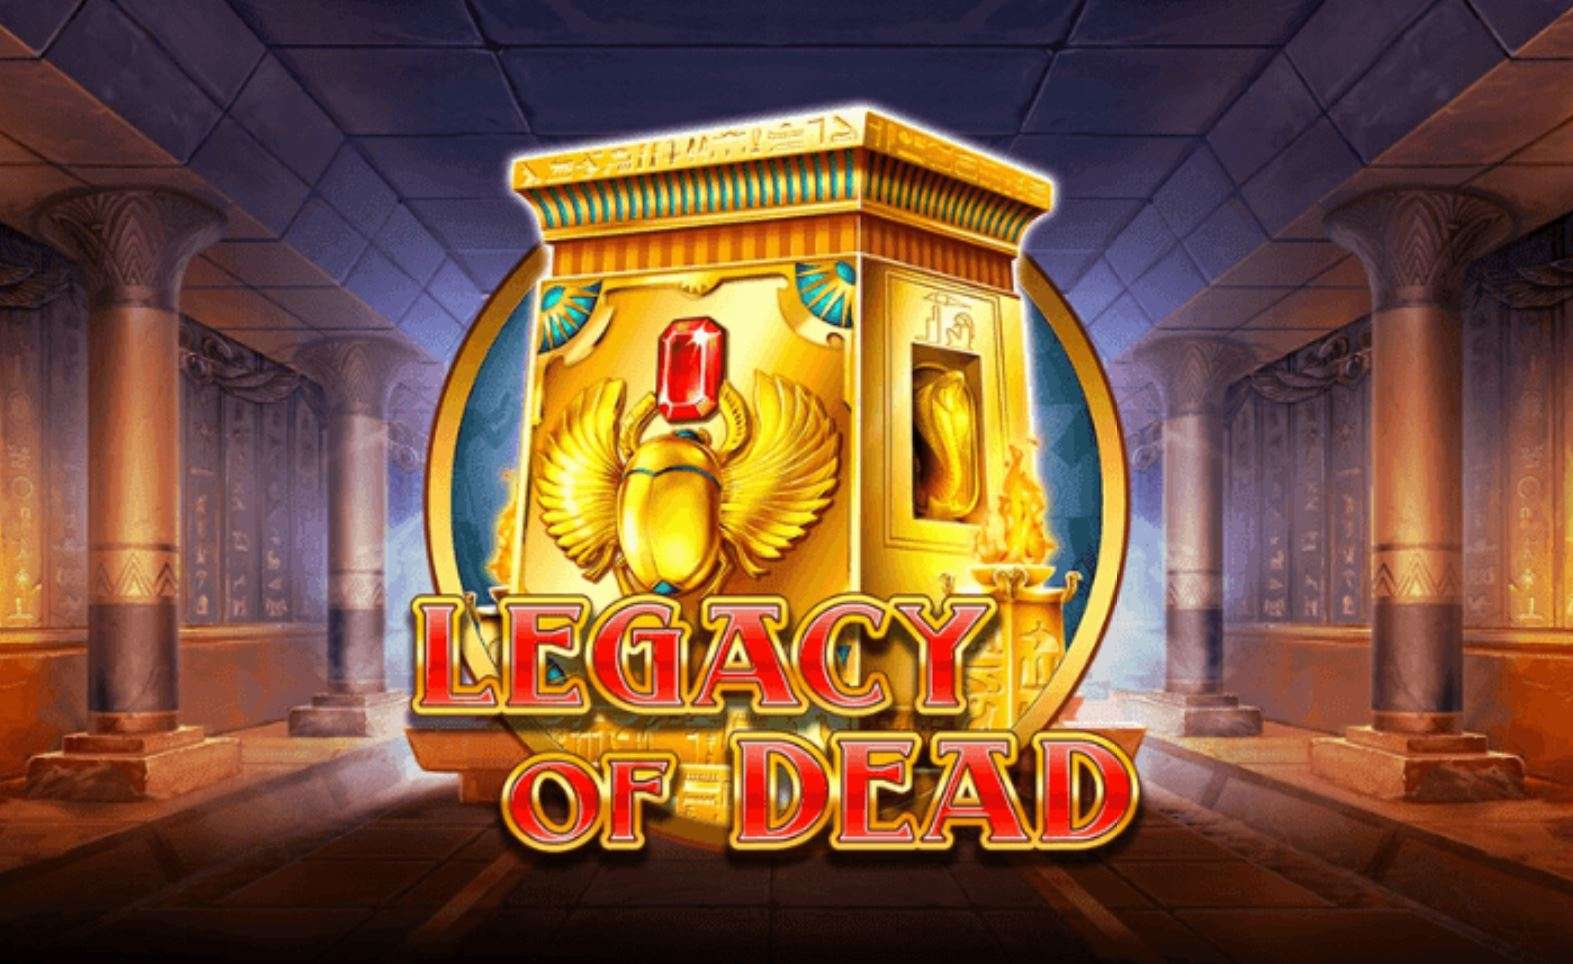 The Legacy of Dead Slots